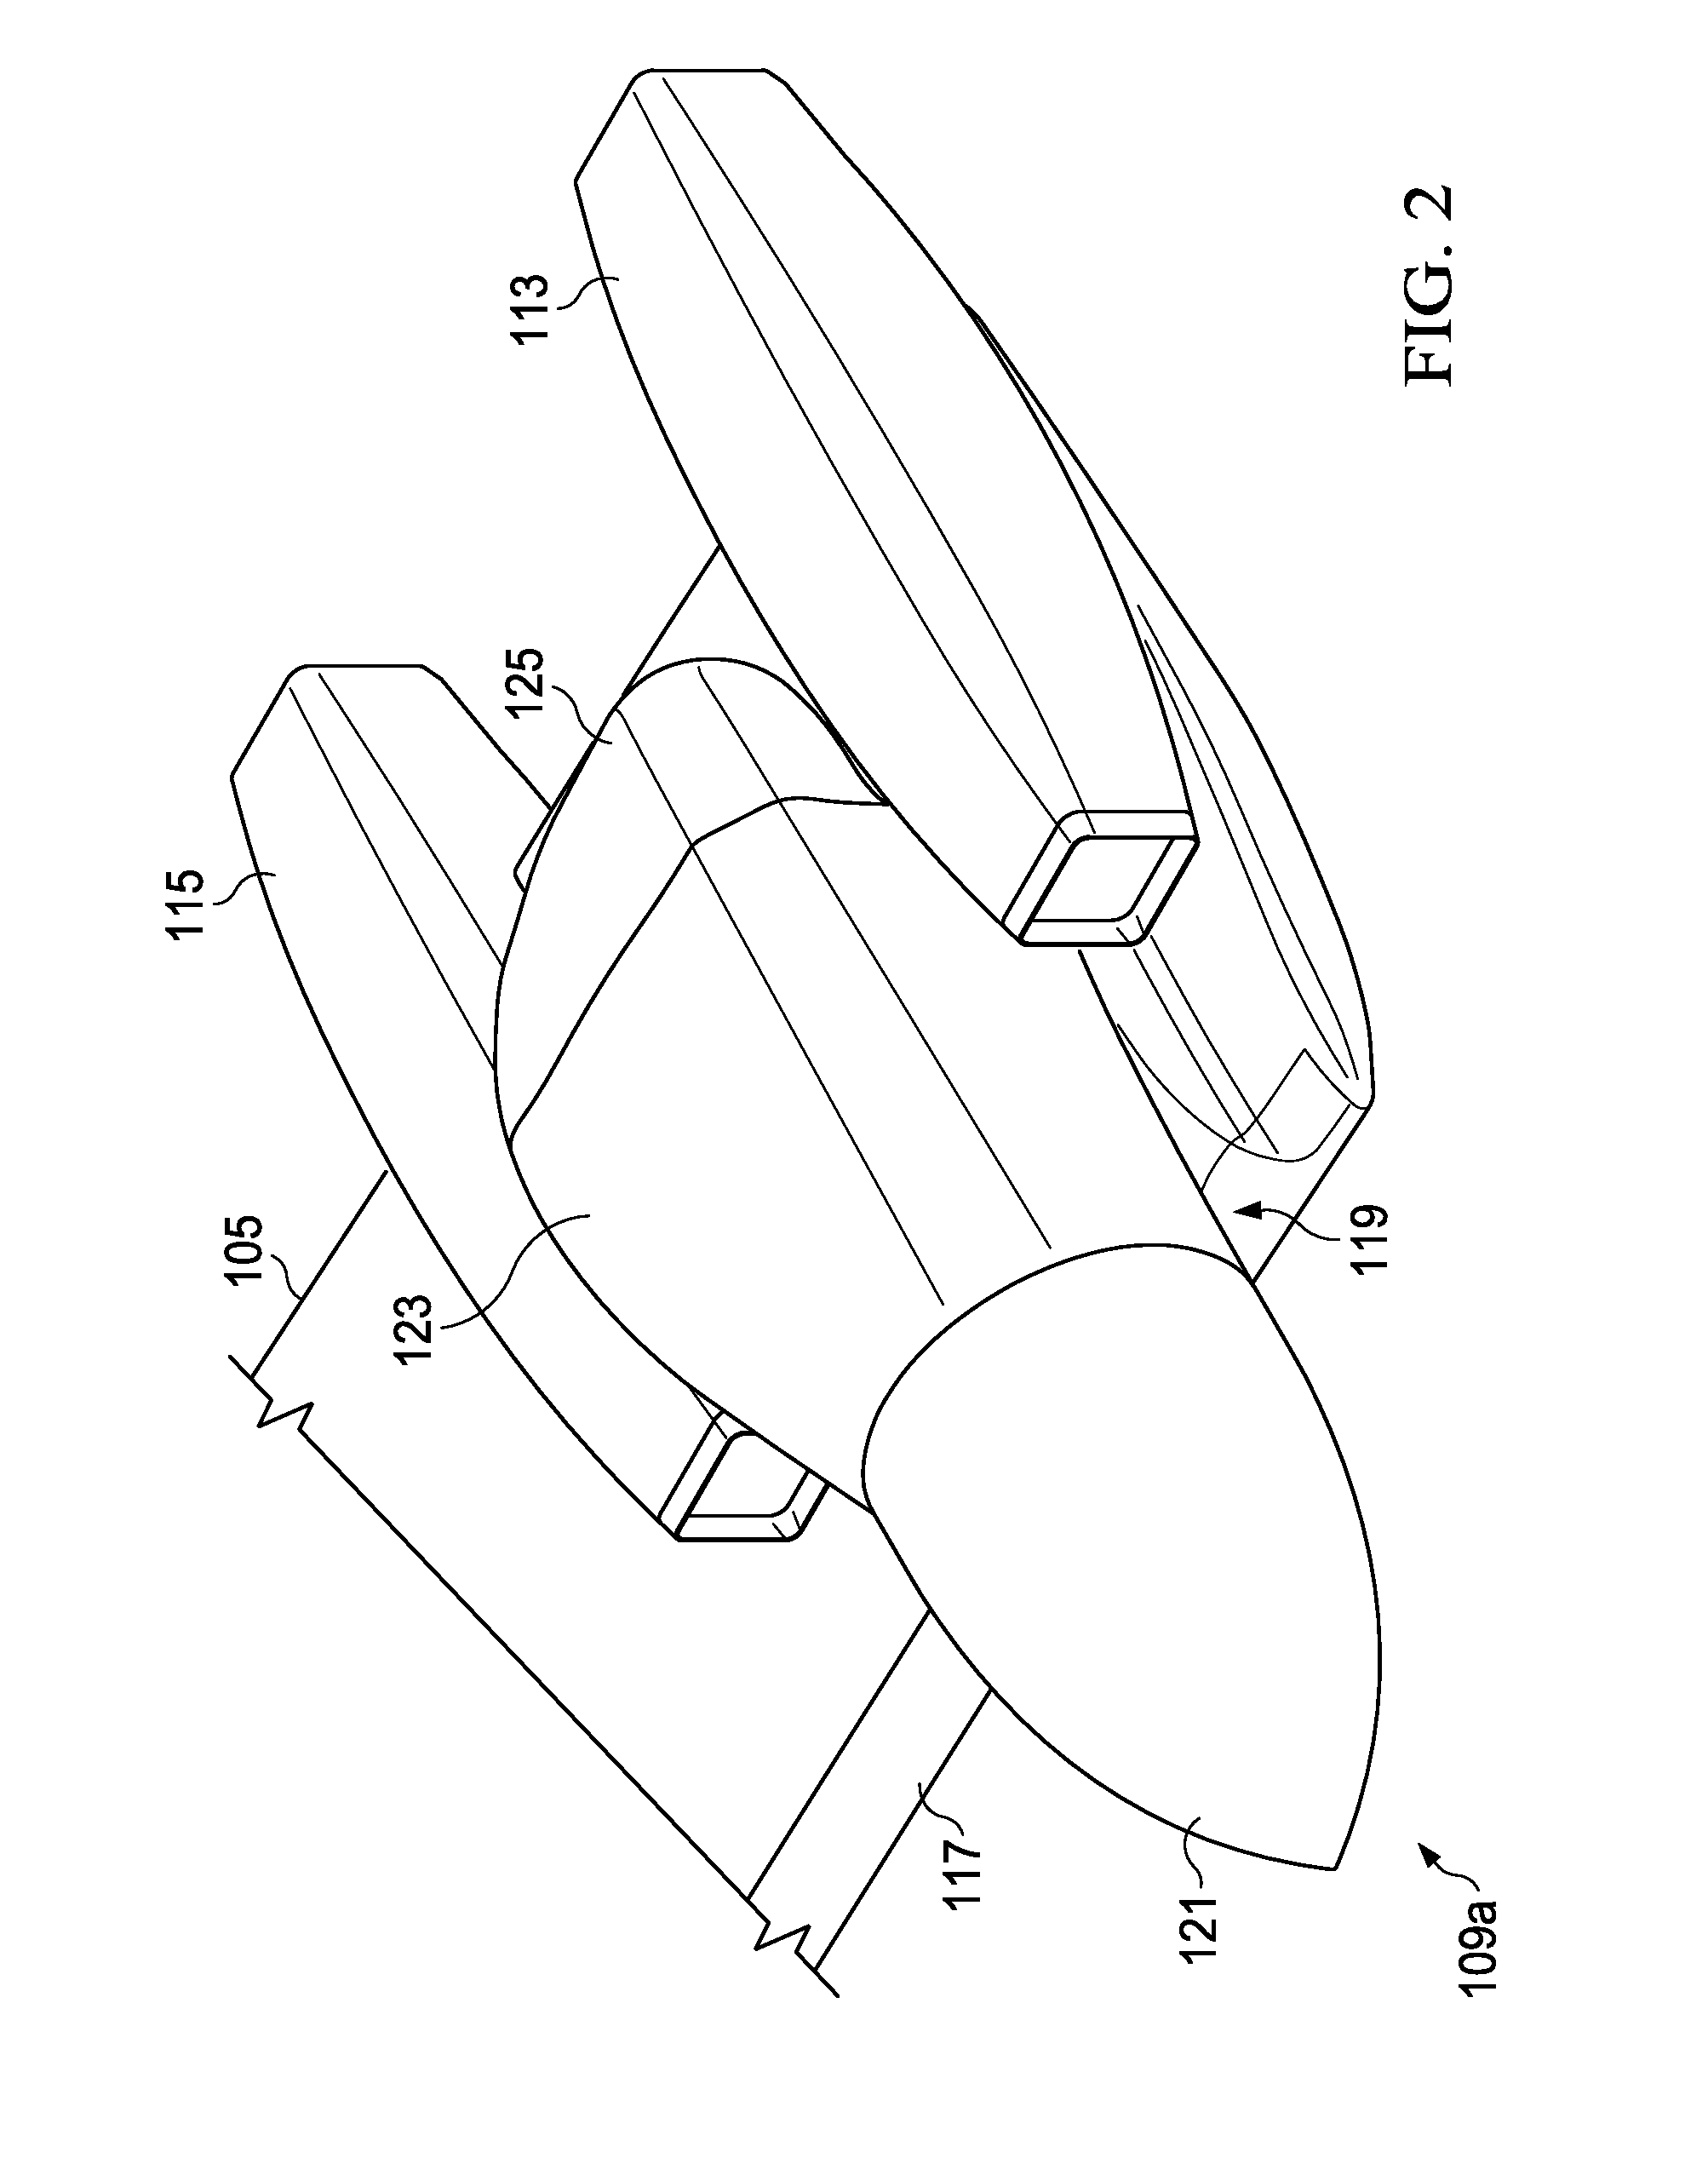 Tilt rotor aircraft with fixed engine arrangement